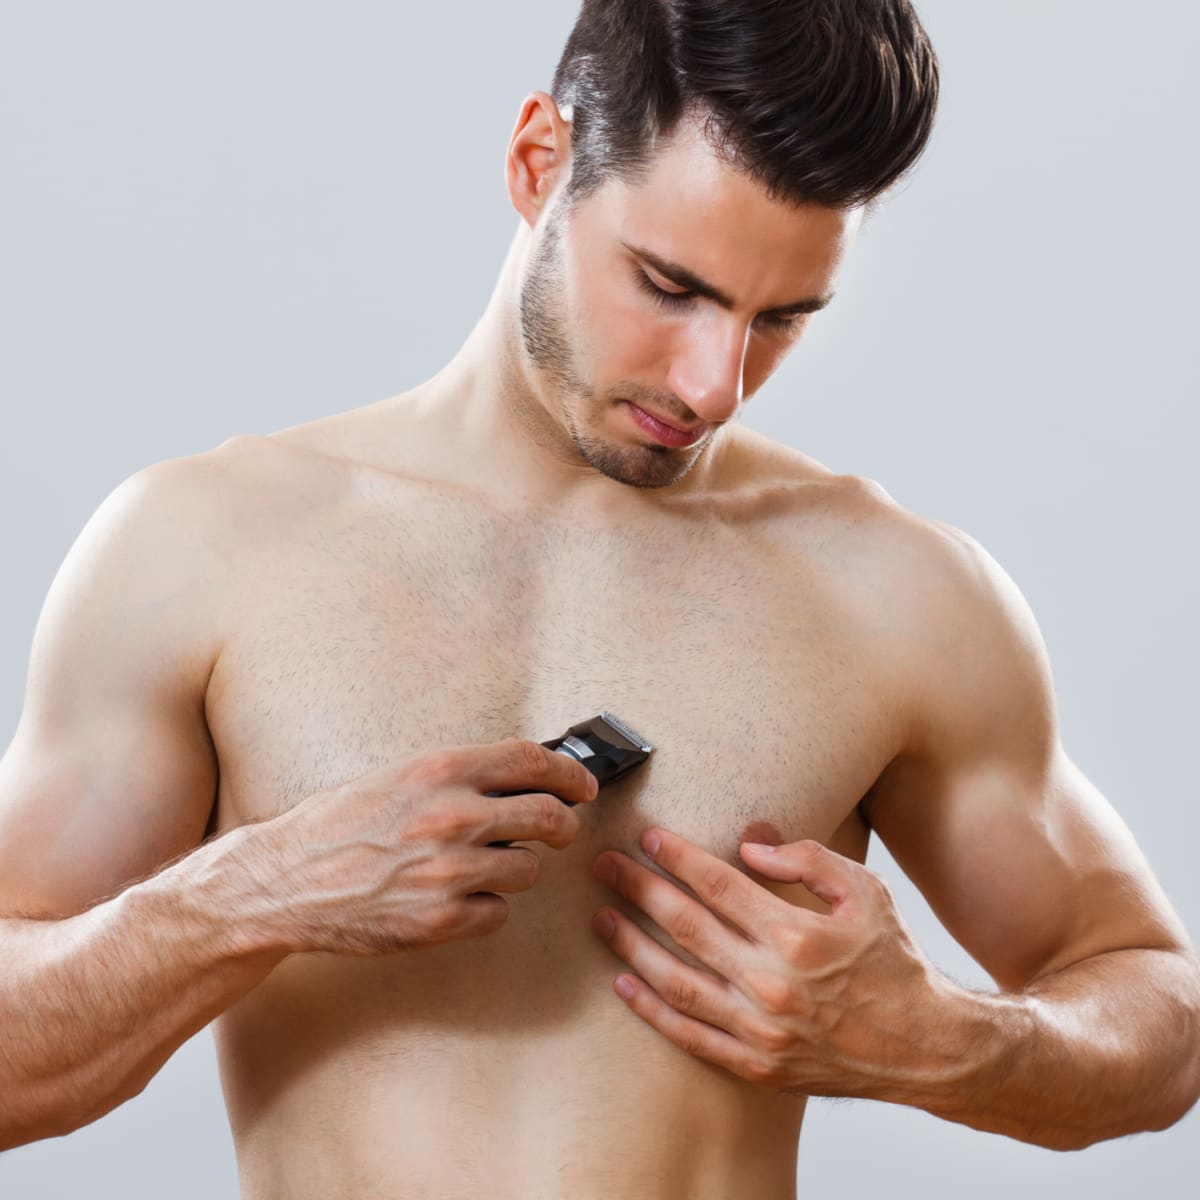 Male breasts. Athlete. Depilation for men. Nipple. Muscle